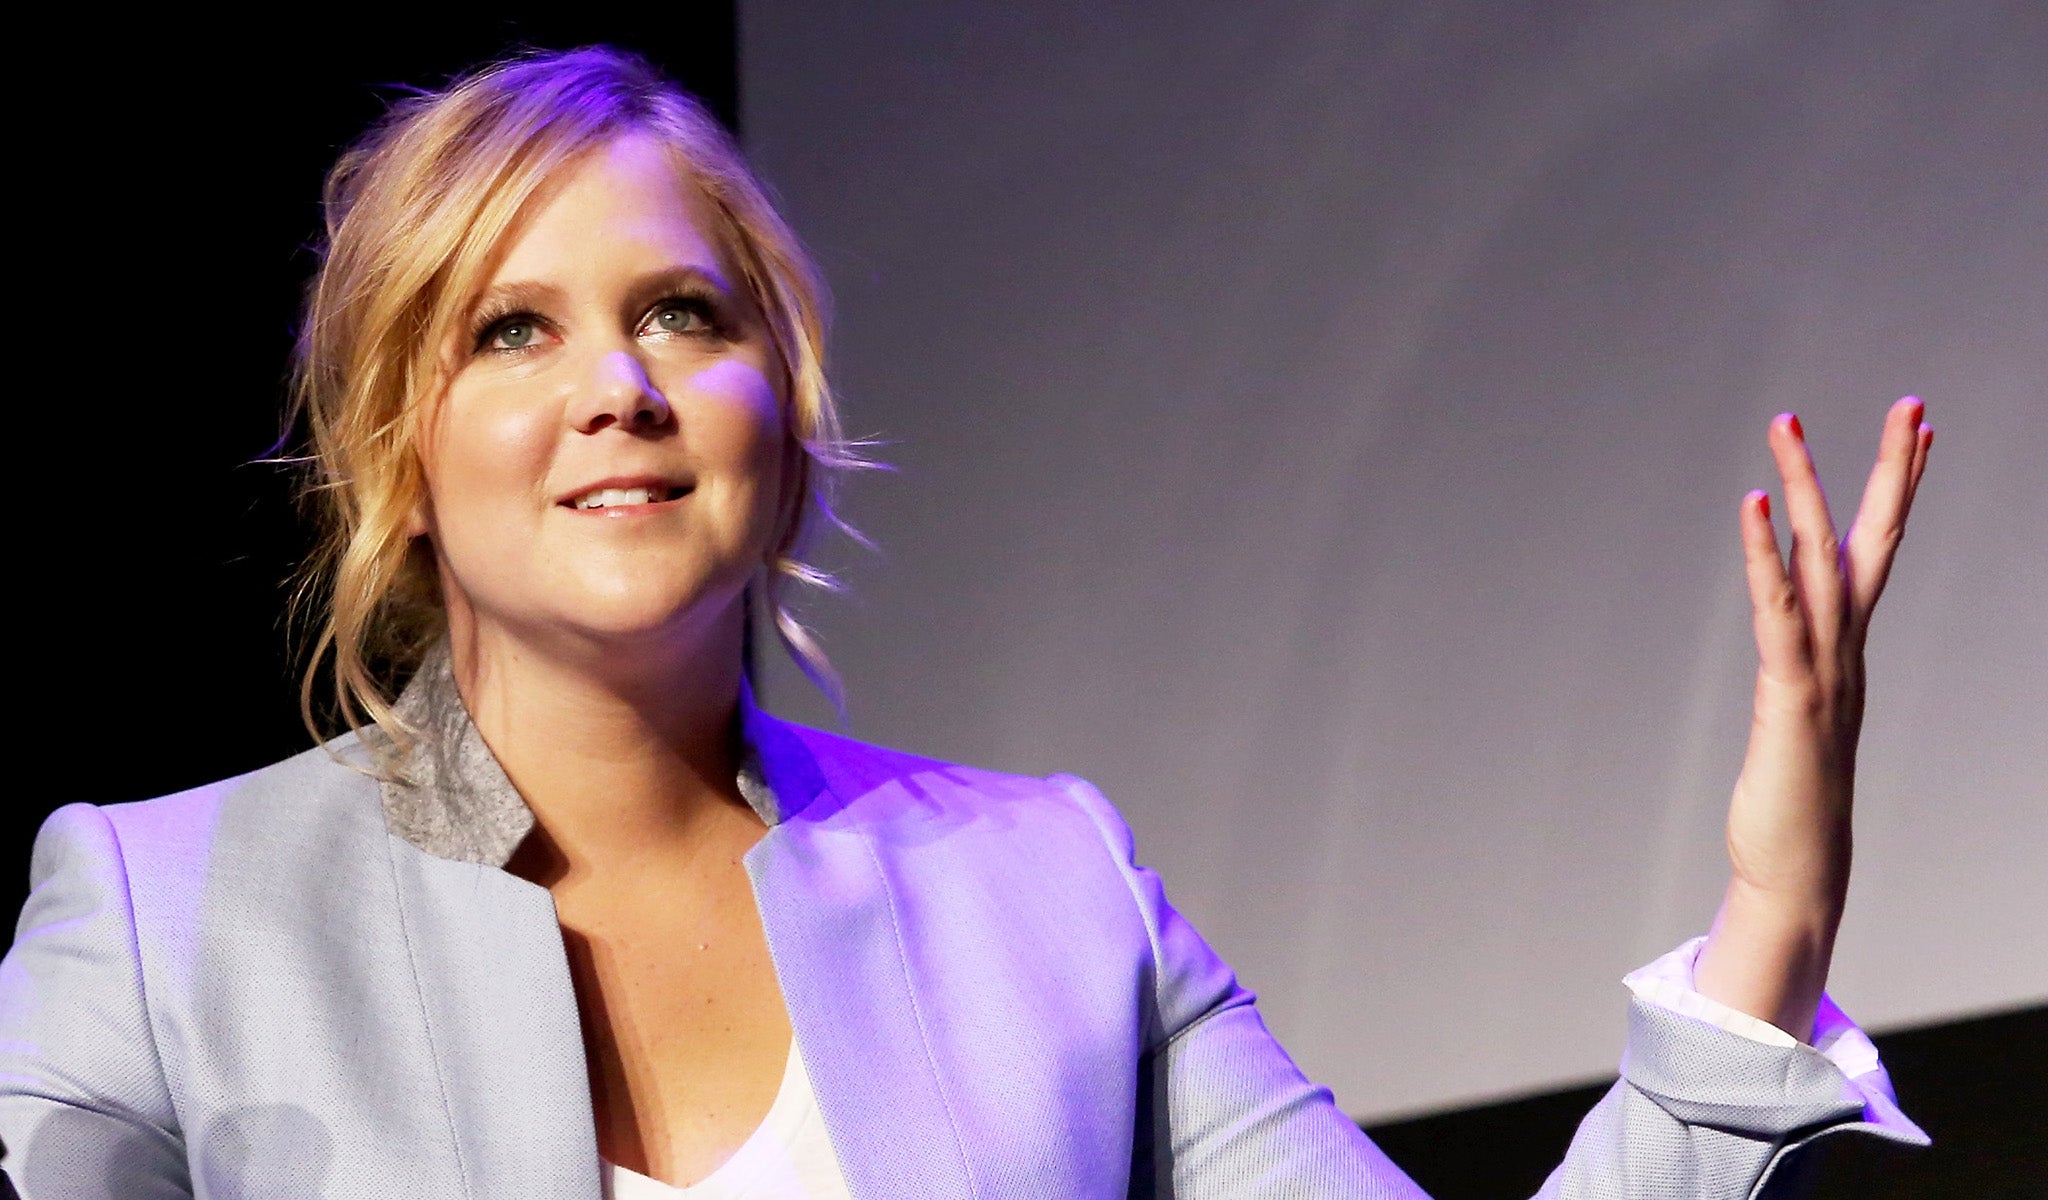 Amy Schumer says the funniest things